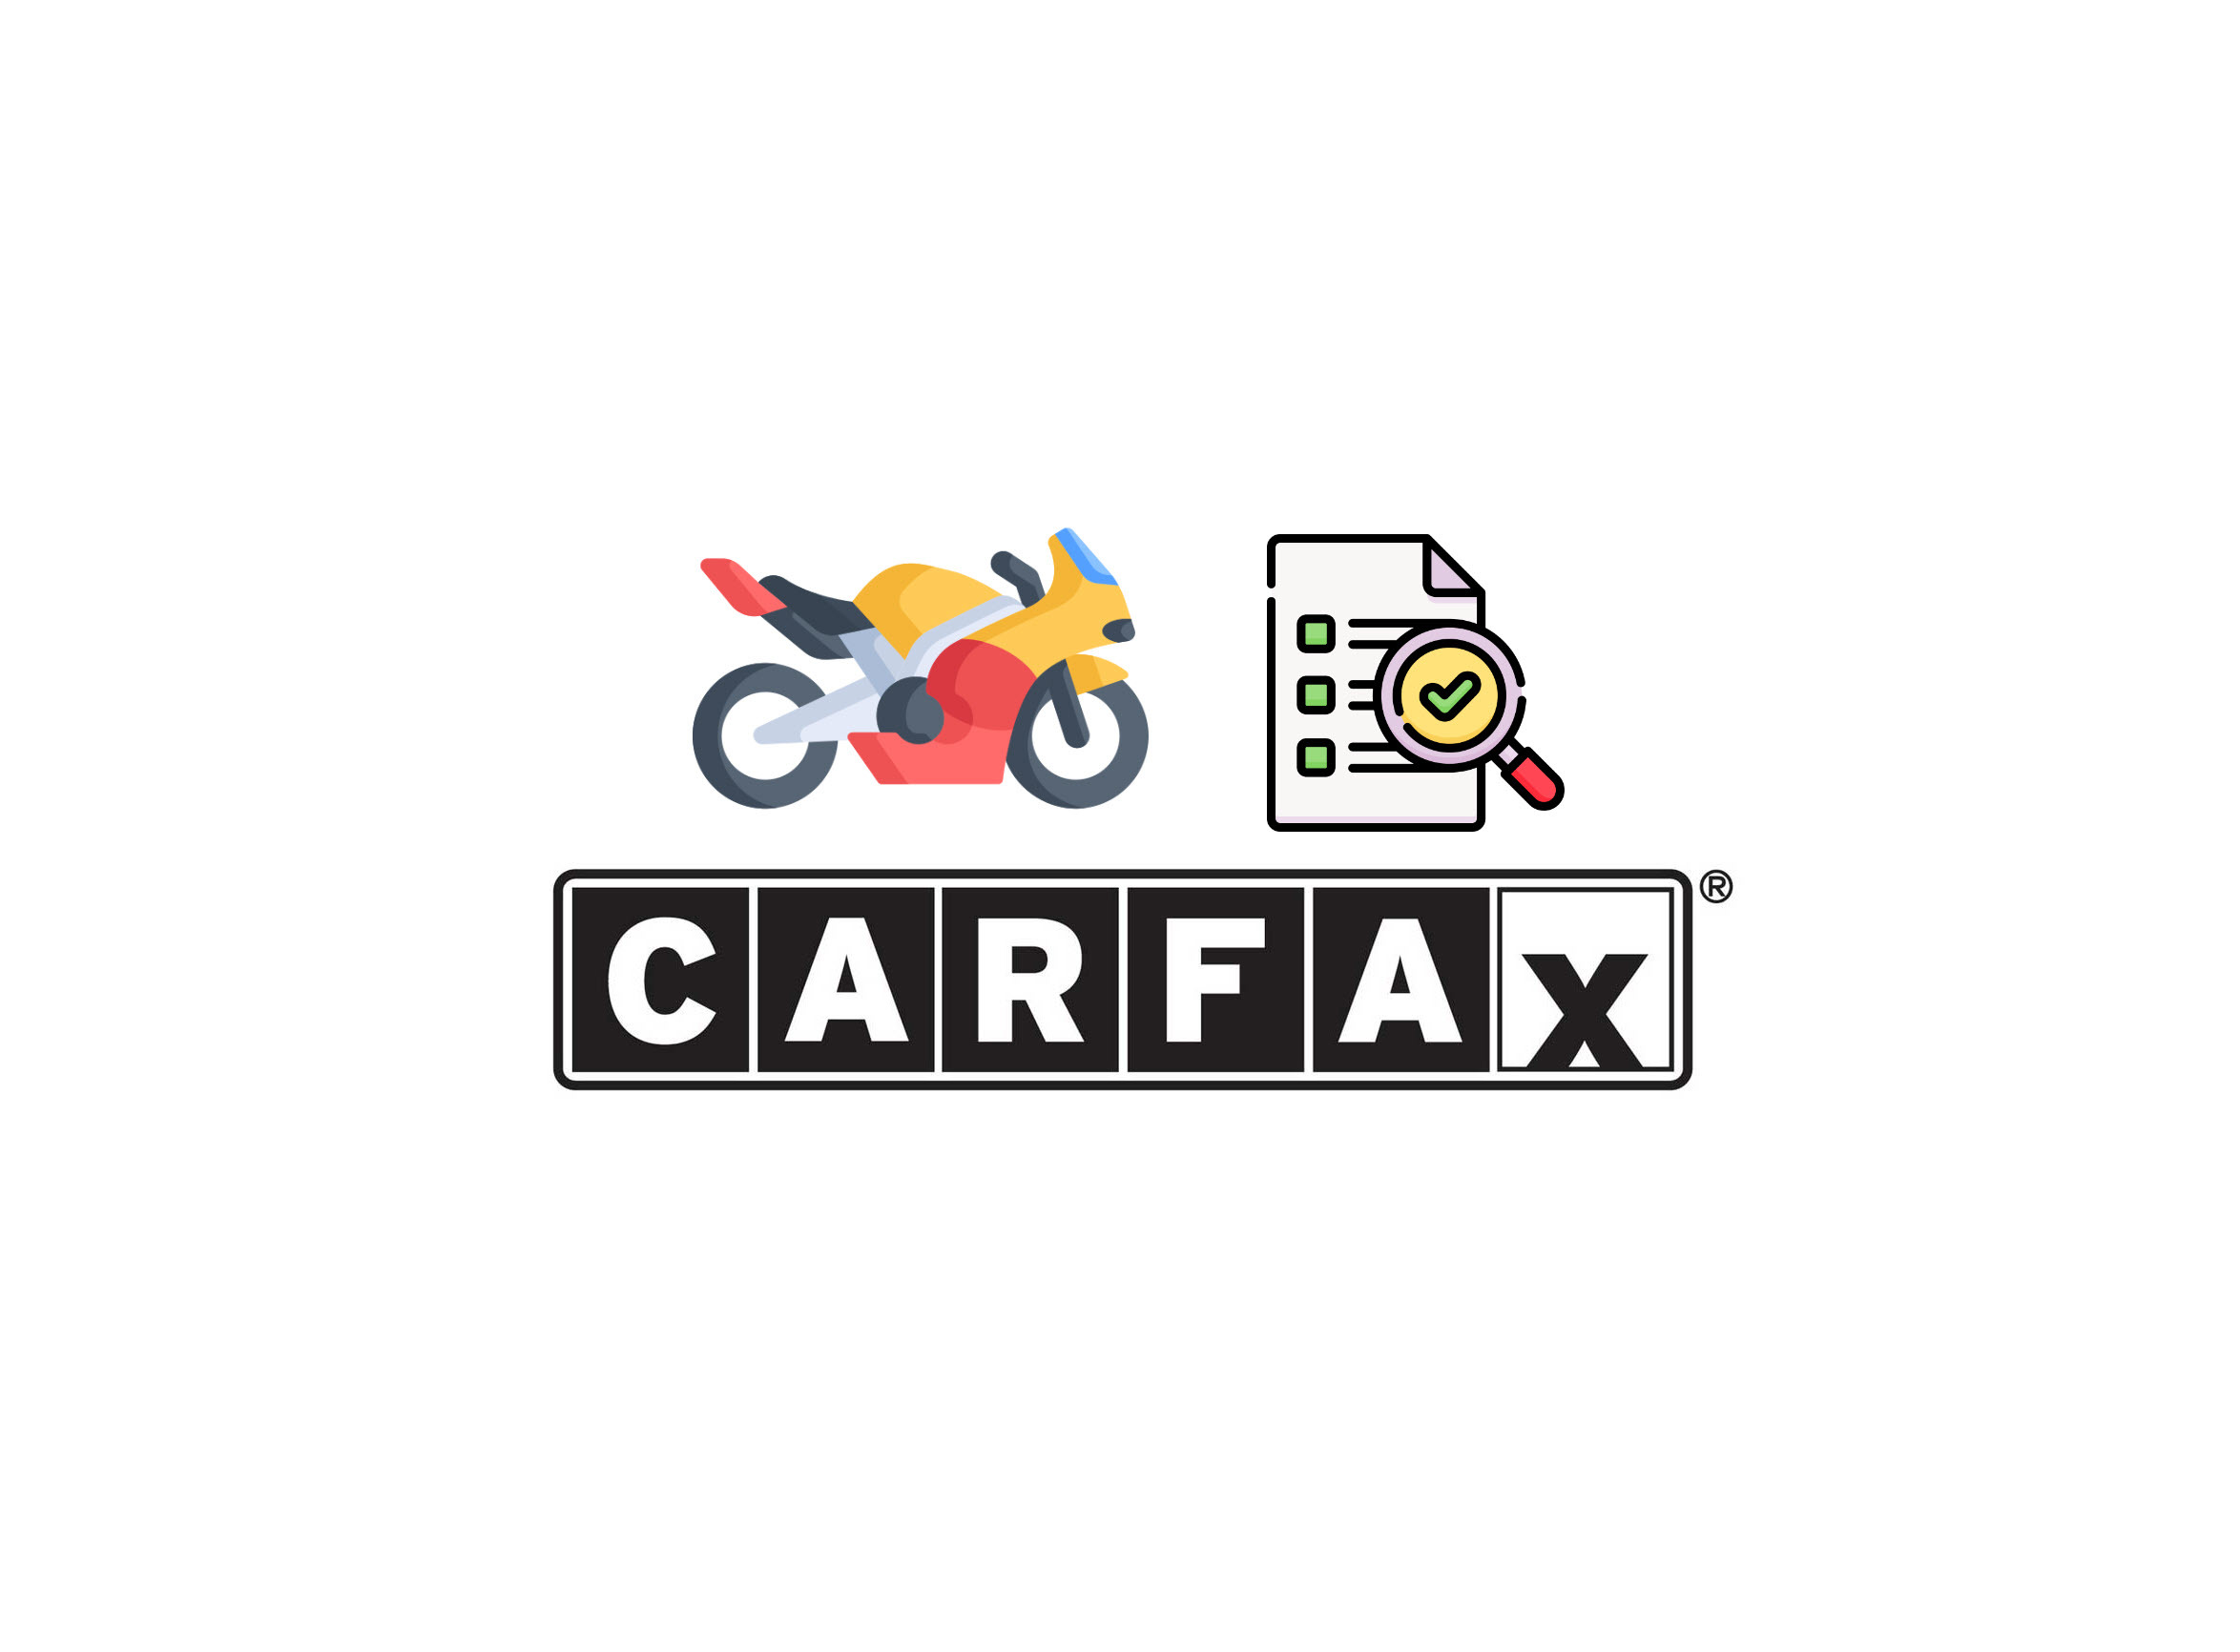 CARFAX for Motorcycles | How to CARFAX a Motorcycle for $1 - Super Easy